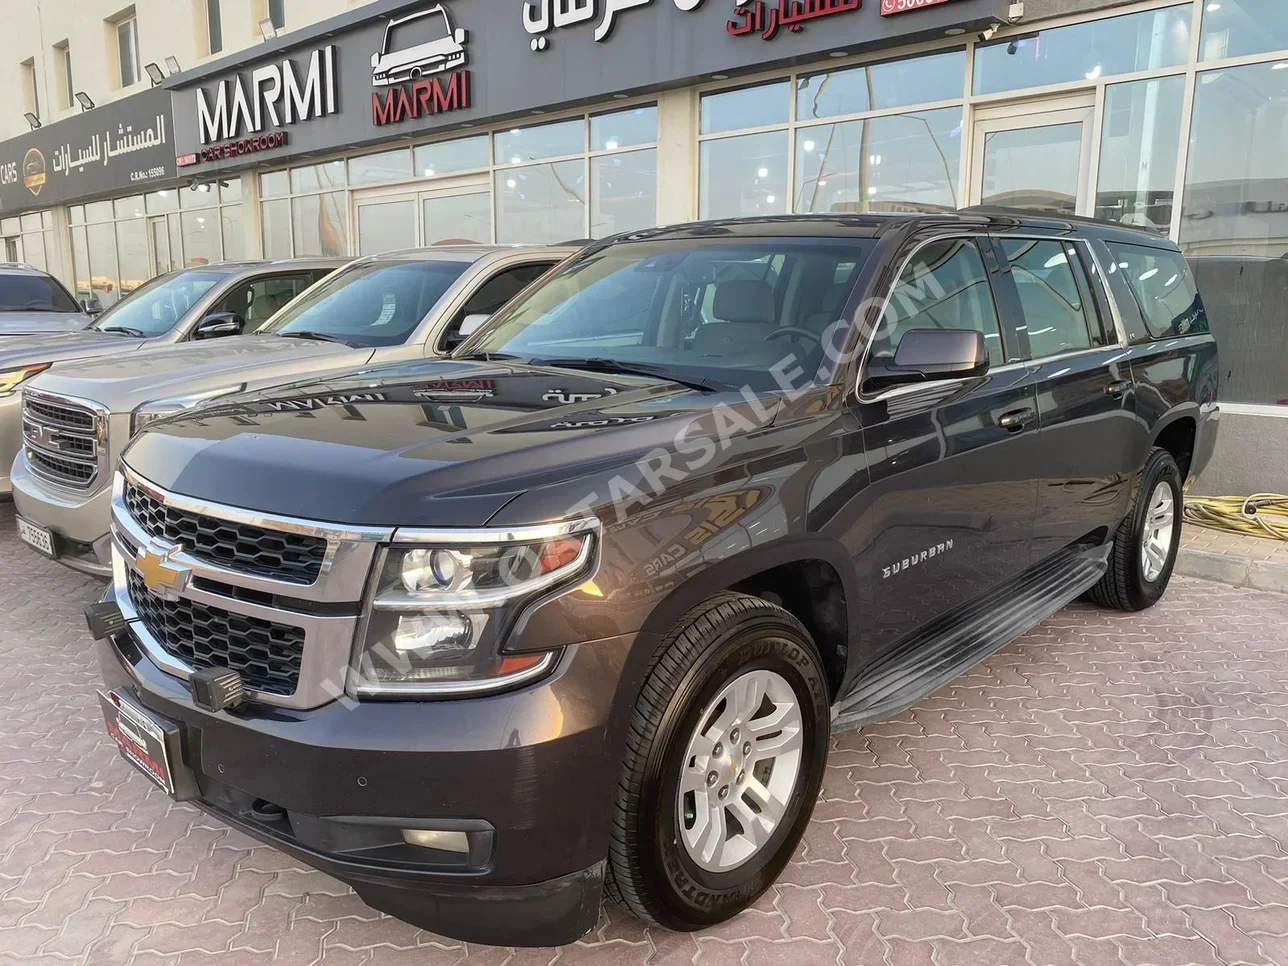 Chevrolet  Suburban  2015  Automatic  217,000 Km  8 Cylinder  Four Wheel Drive (4WD)  SUV  Gray